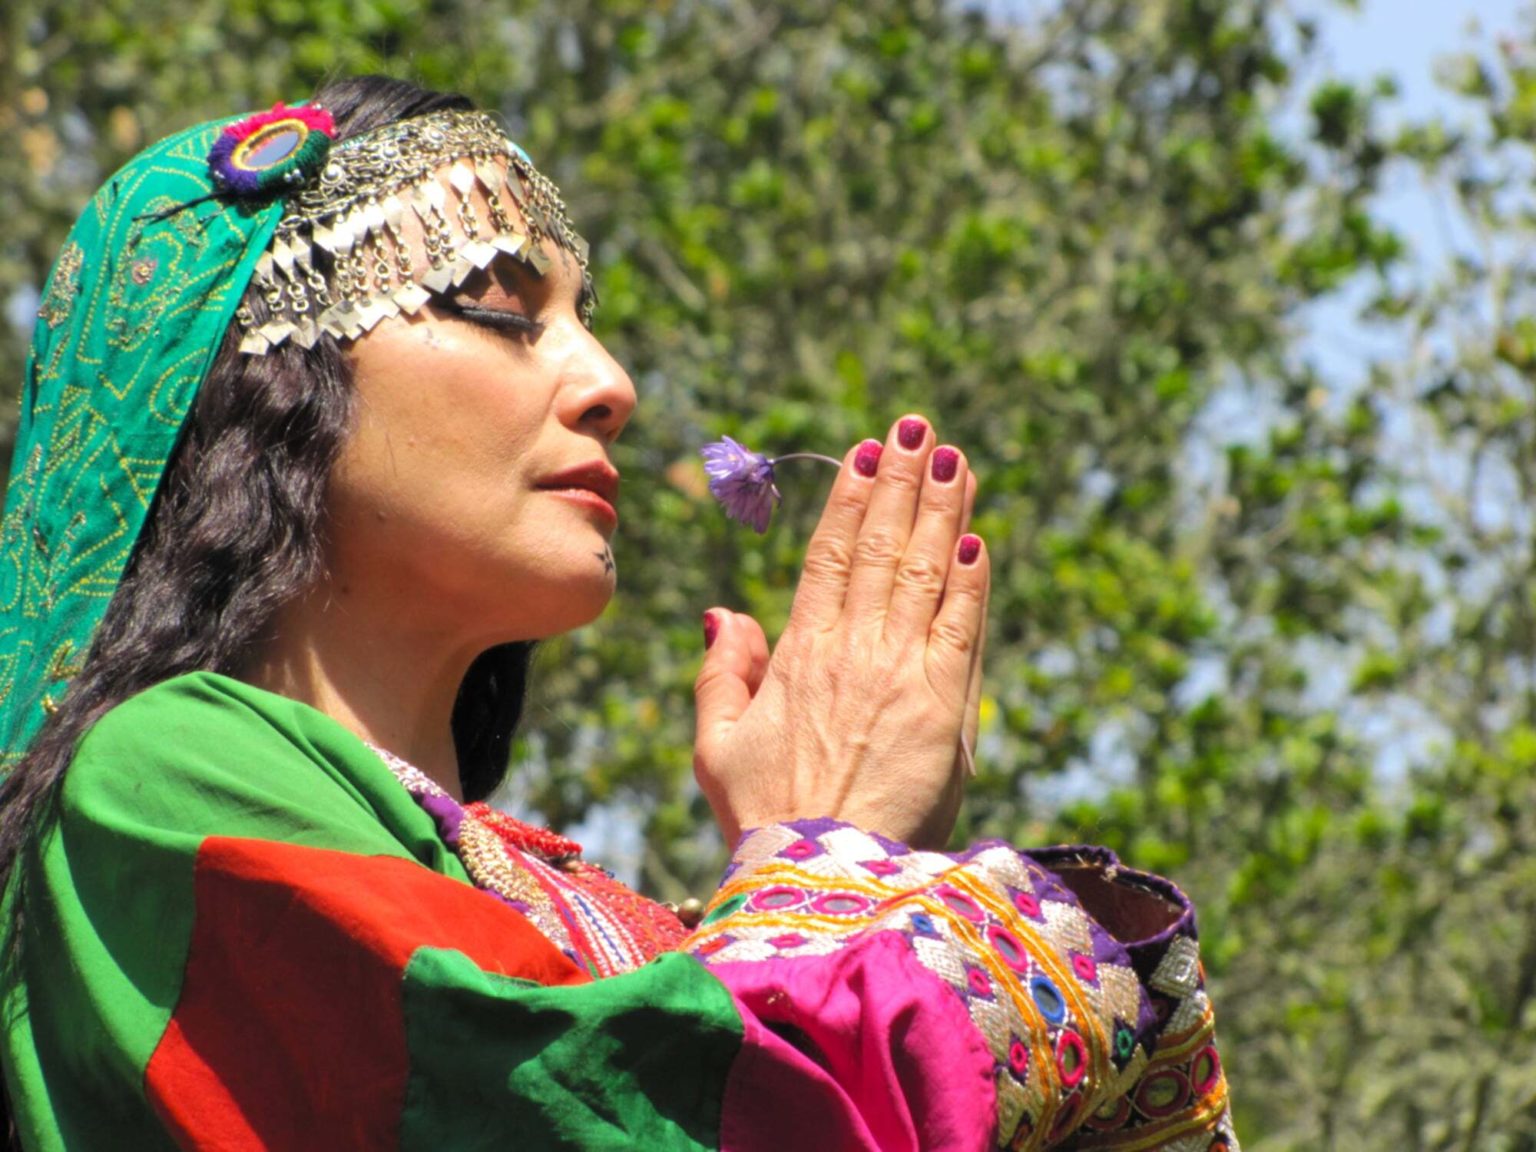 photo of woman with headscarves and prayer hands